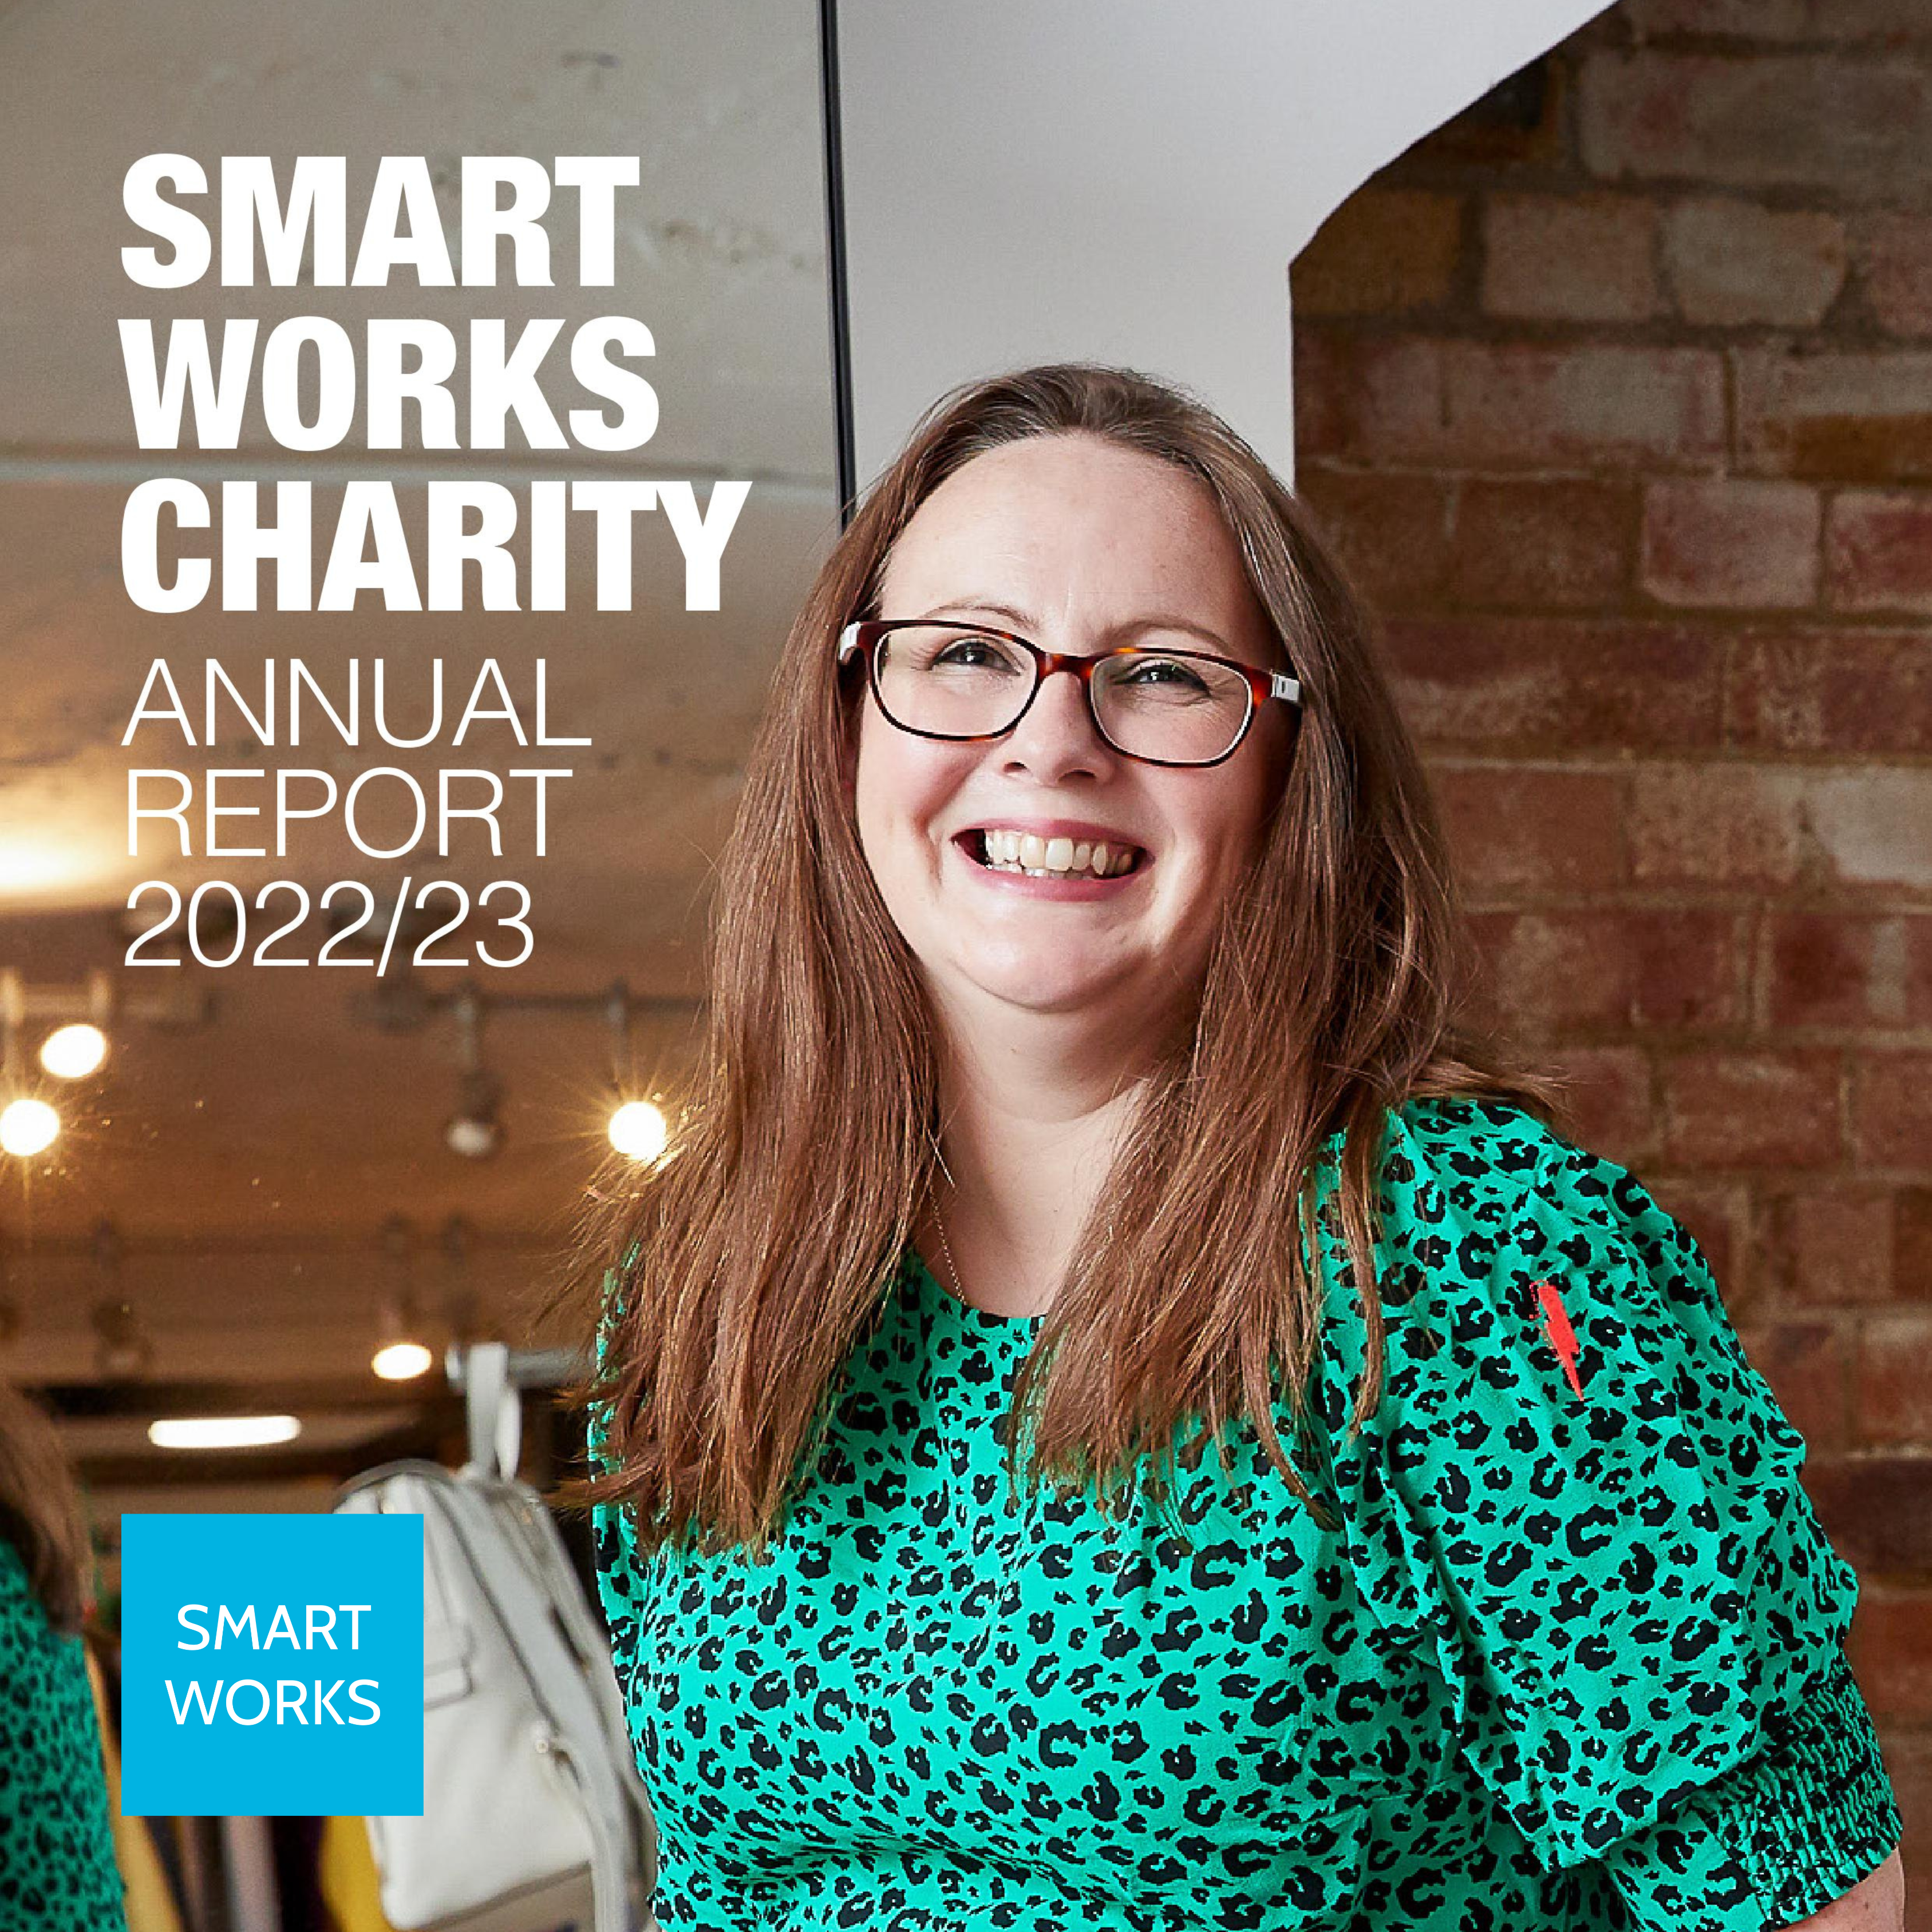 The Smart Works Annual Report for 2022/23 image